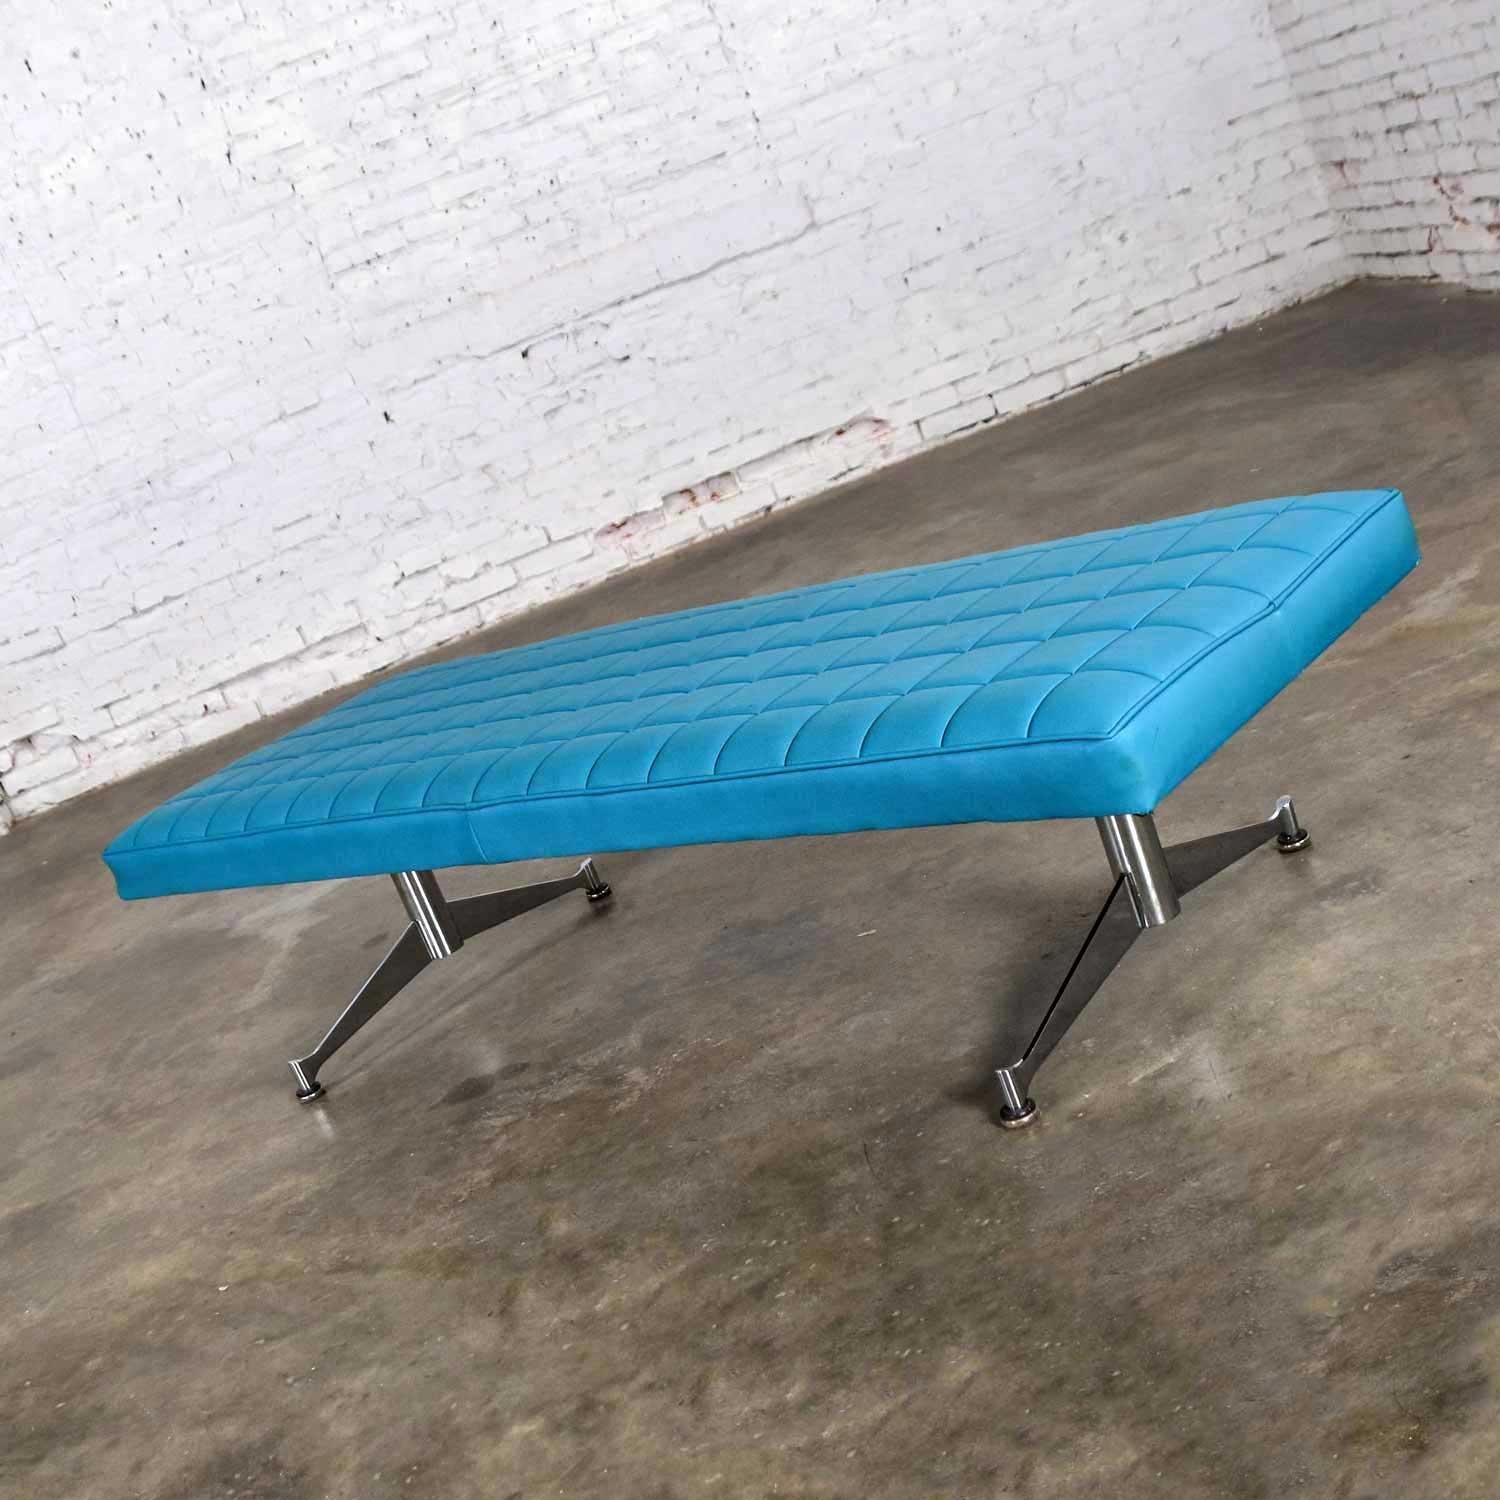 Awesome Mid-Century Modern bench or daybed in the style of Arthur Umanoff for Madison Furniture Co. Comprised of the original turquoise vinyl faux leather with box stitching and chrome steel legs. In beautiful vintage condition. There is some sun